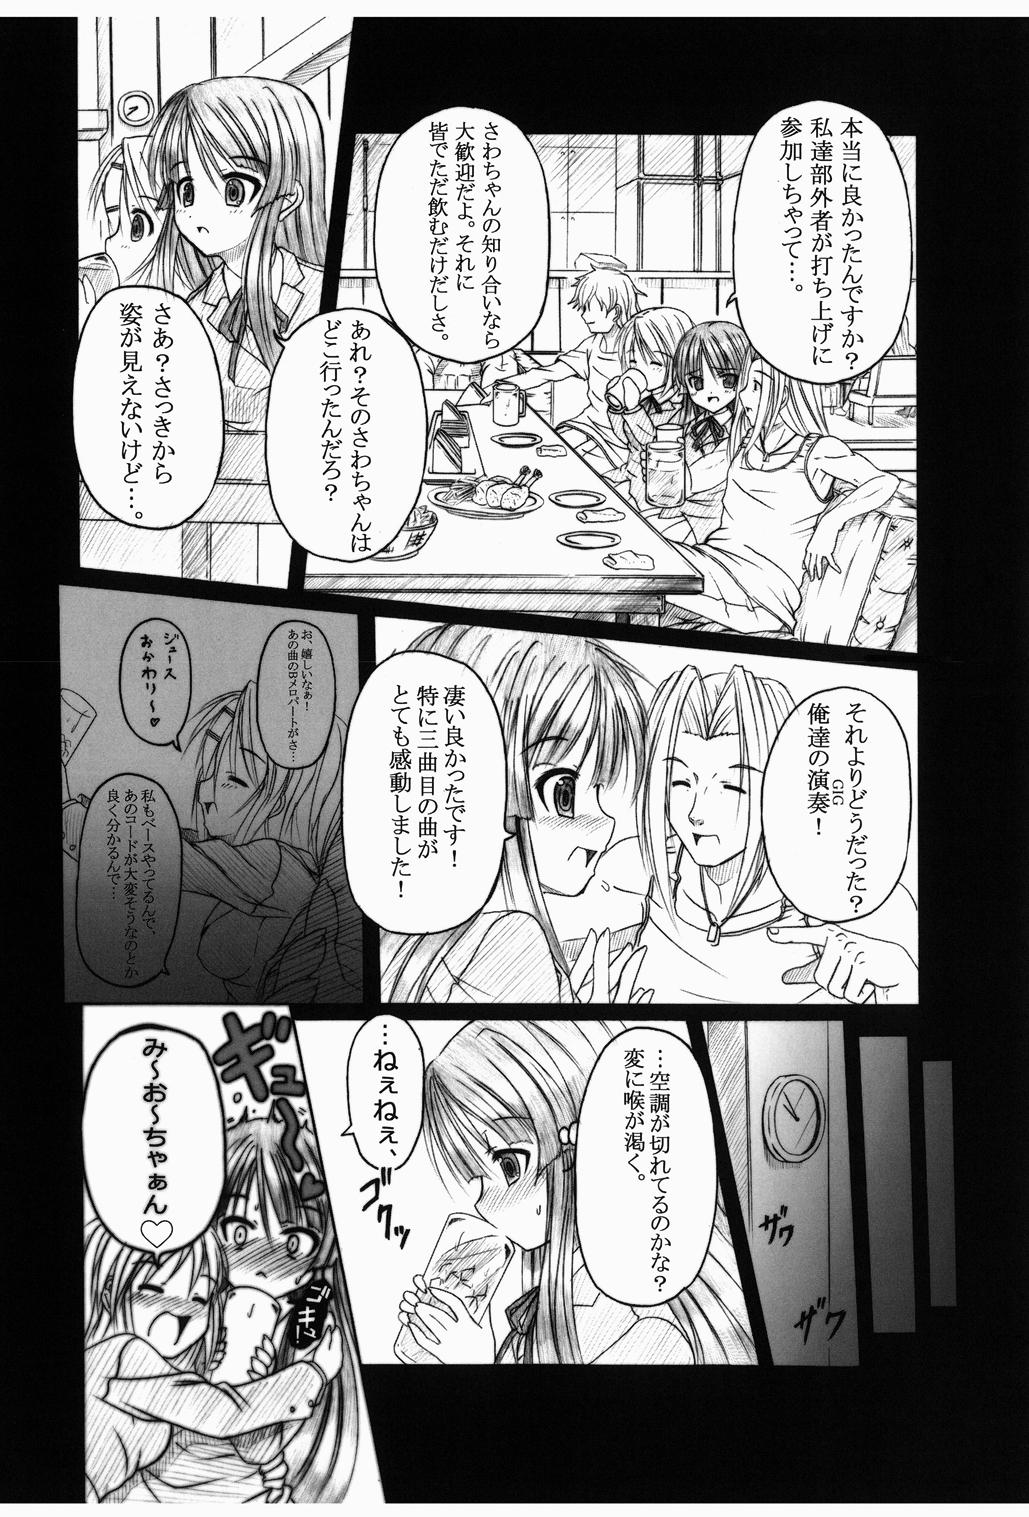 Gay 3some Don't Sei "Lazy" - K-on Exgf - Page 5